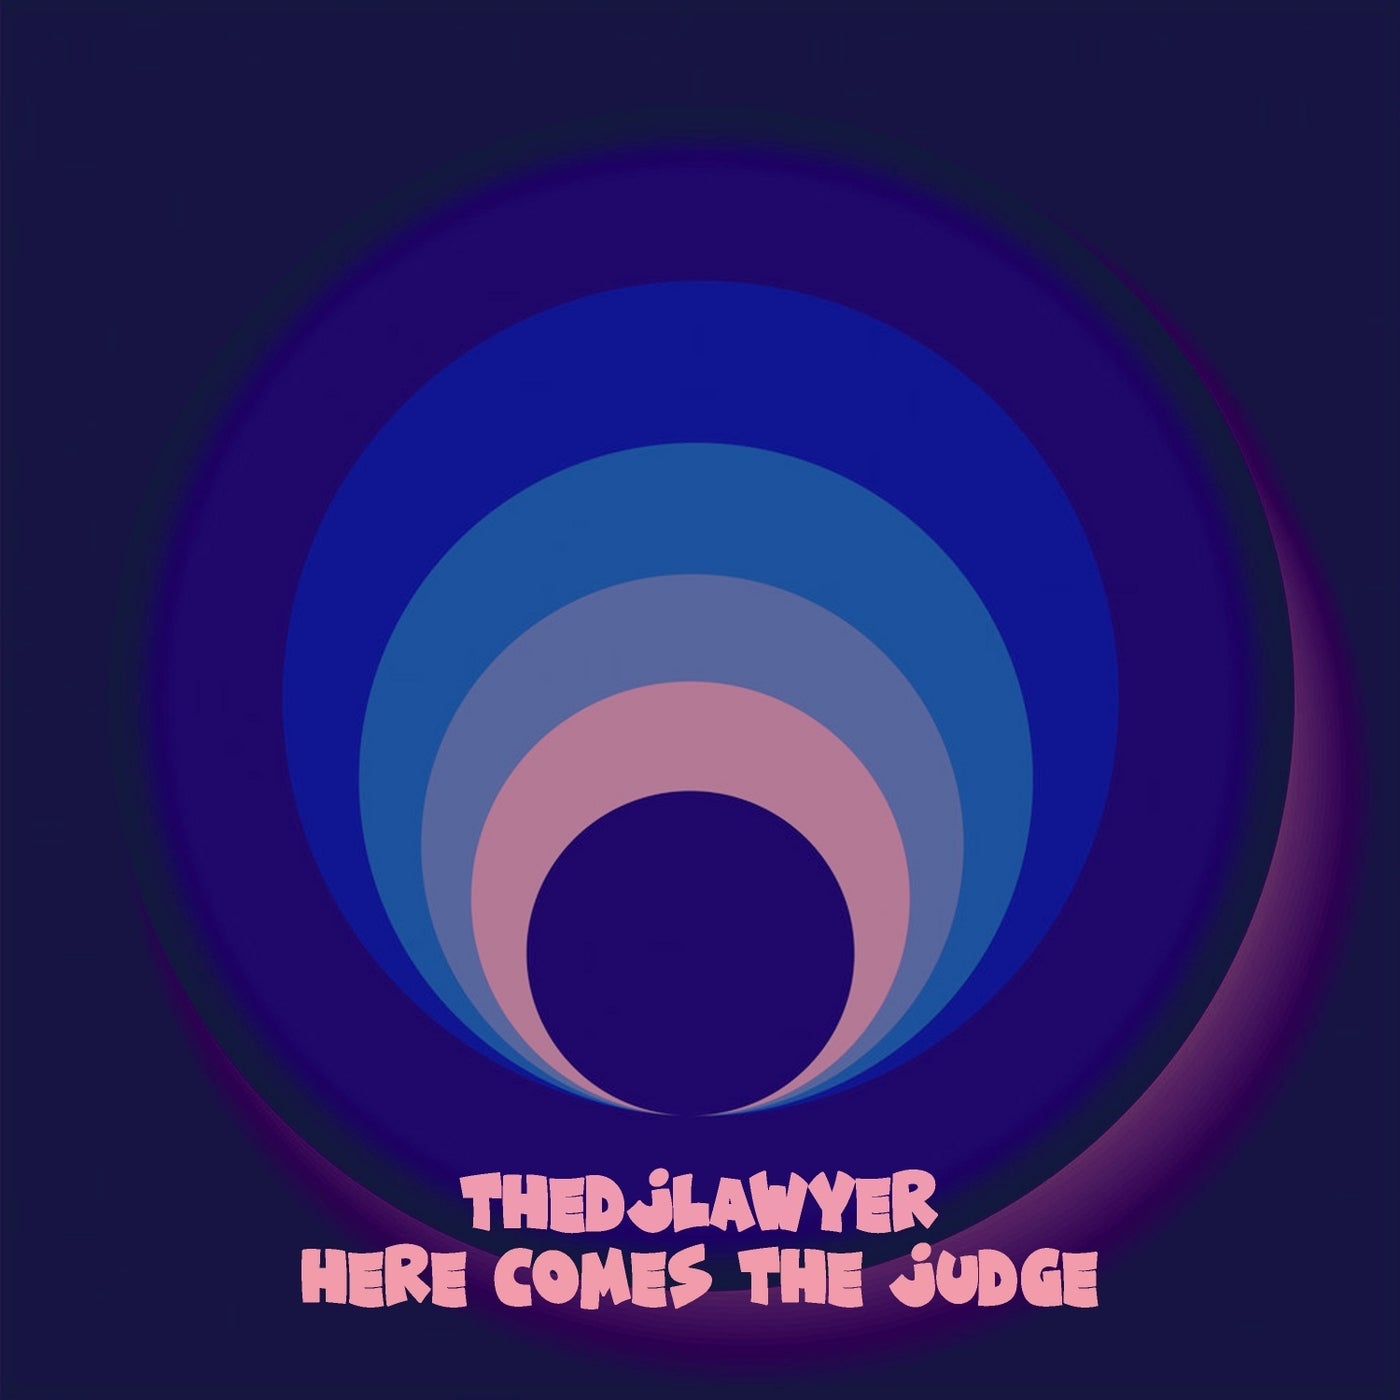 TheDjLawyer - Here Comes the Judge [BRV68]